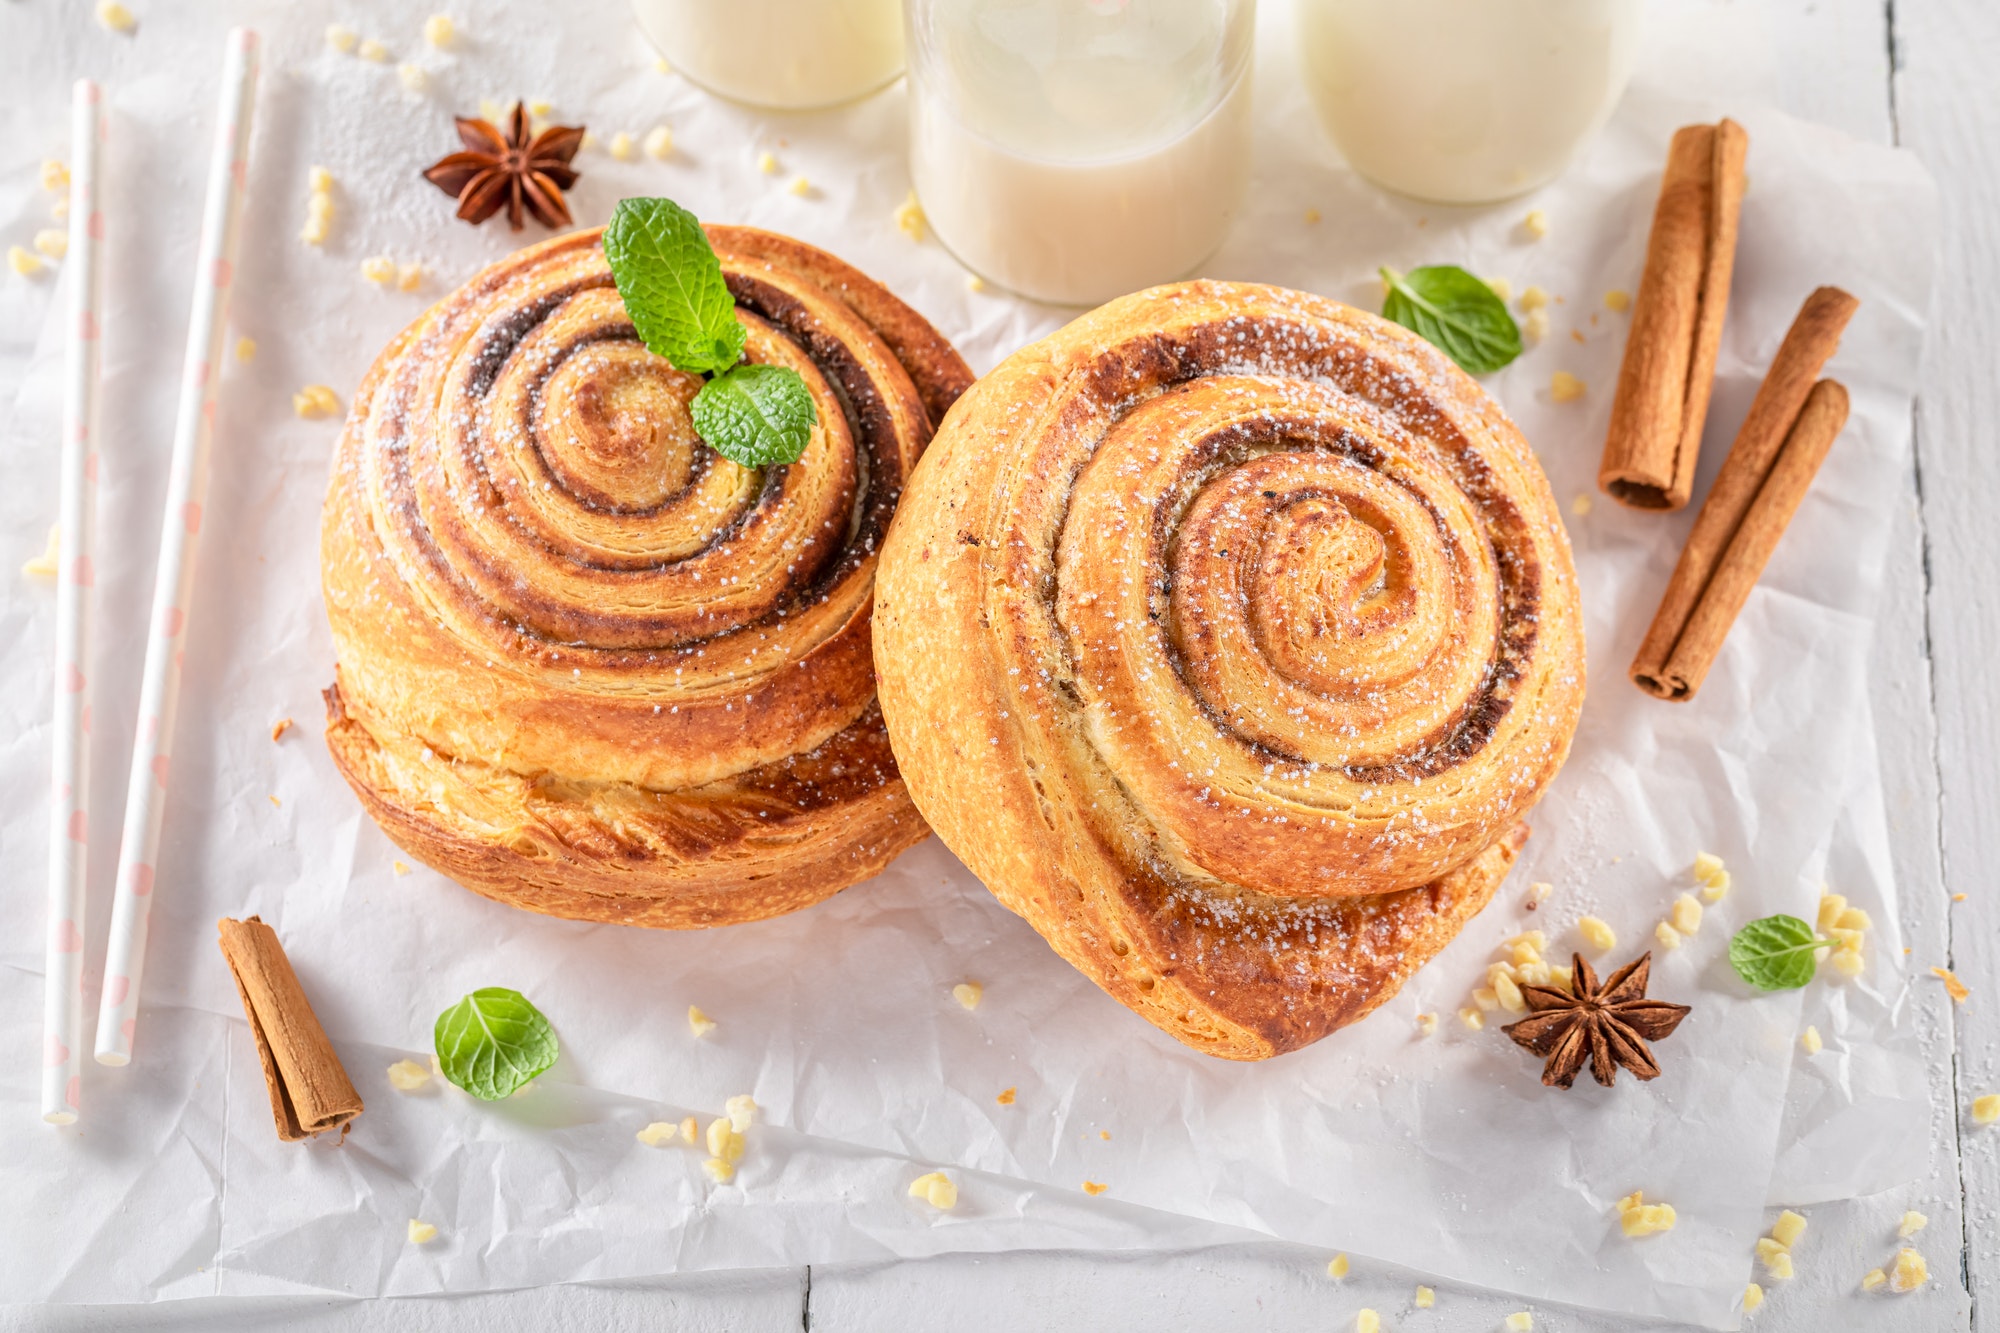 Sweet and delicious cinnamon rolls with sugar and cinnamon.